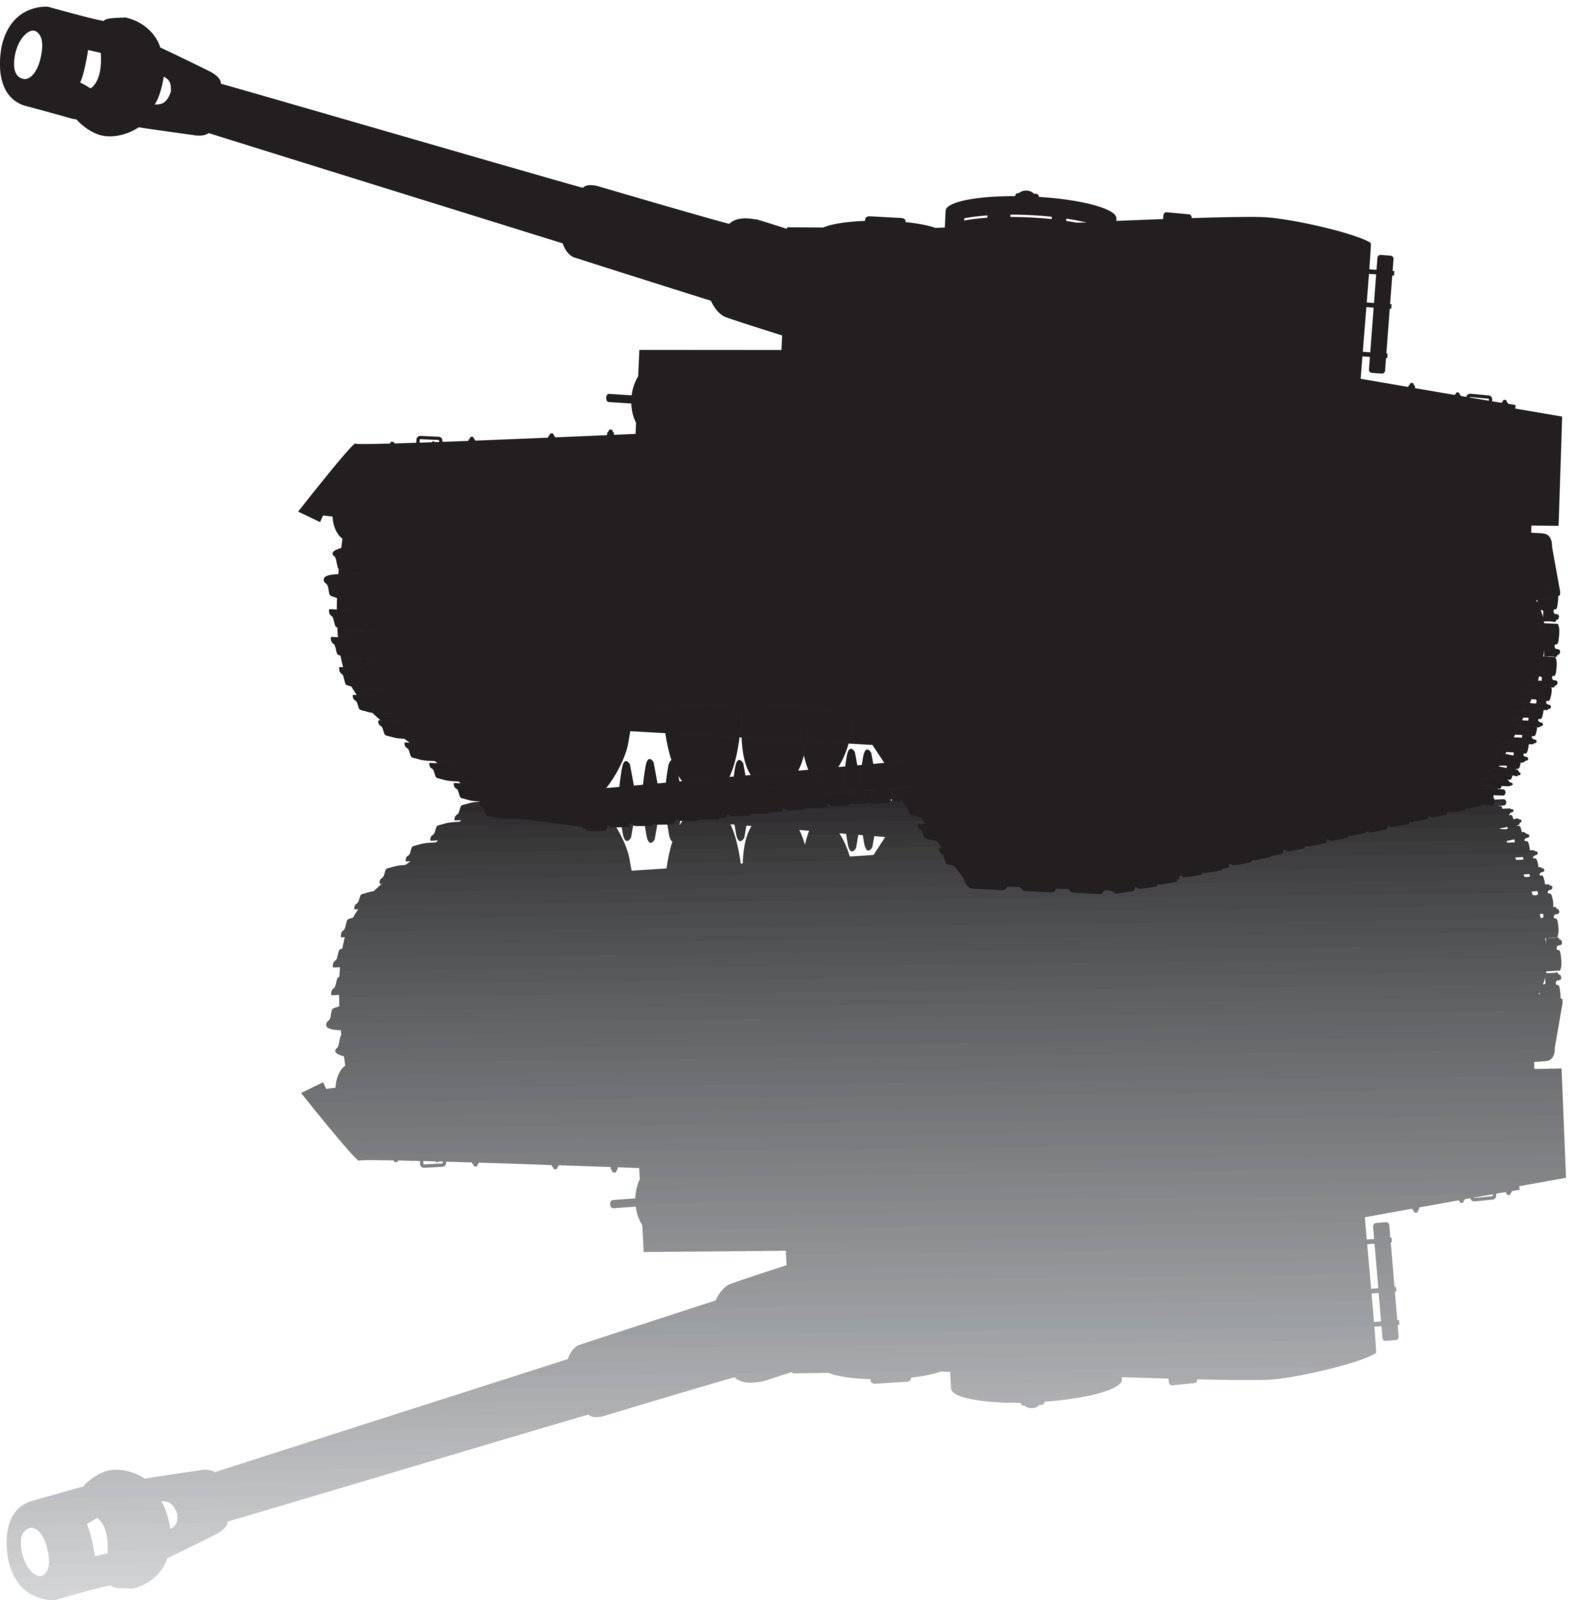 WW2 tank vector silhouette with reflection